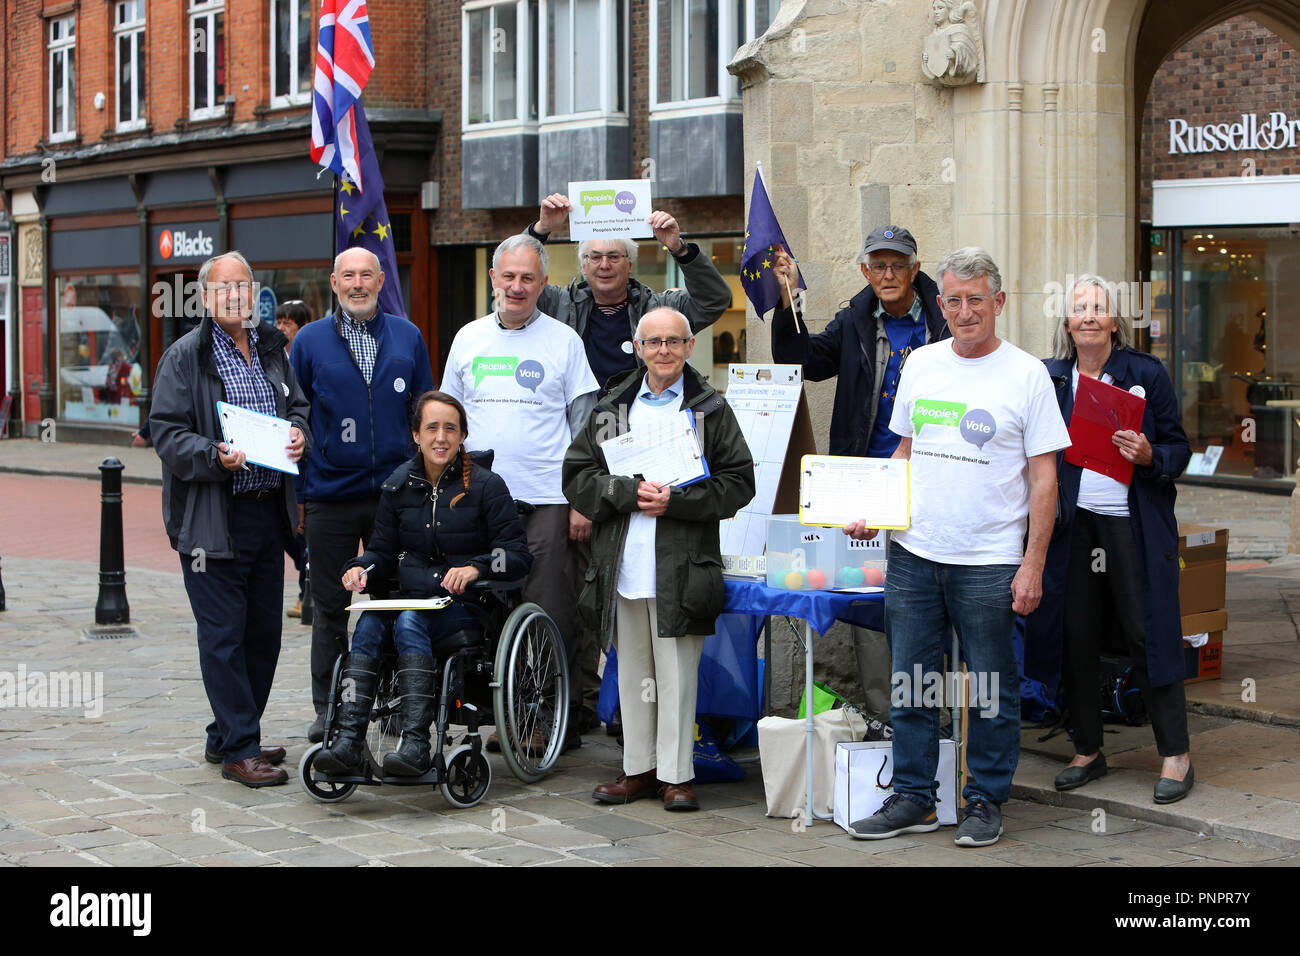 Chichester, West Sussex, UK. A group collecting signatures in Chichester City Centre to demand a 'Peoples Vote' on the final Brexit Deal.  Saturday 22nd September 2018 © Sam Stephenson/Alamy Live News. Stock Photo